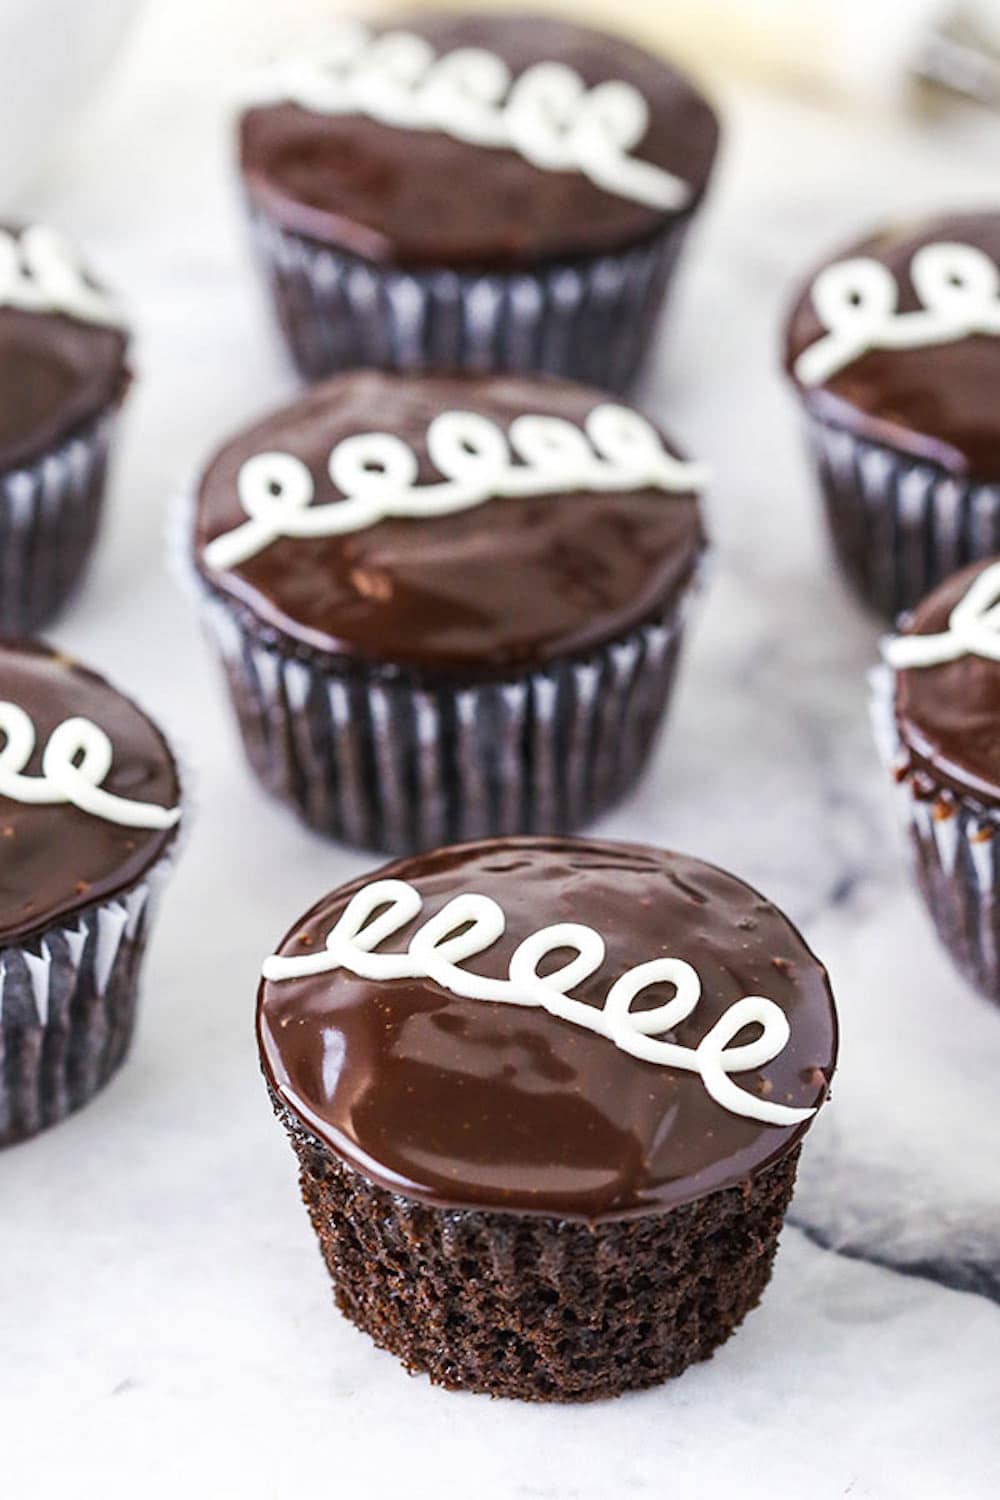 Homemade Hostess Cupcakes Lined up on a Black and White Marble Surface